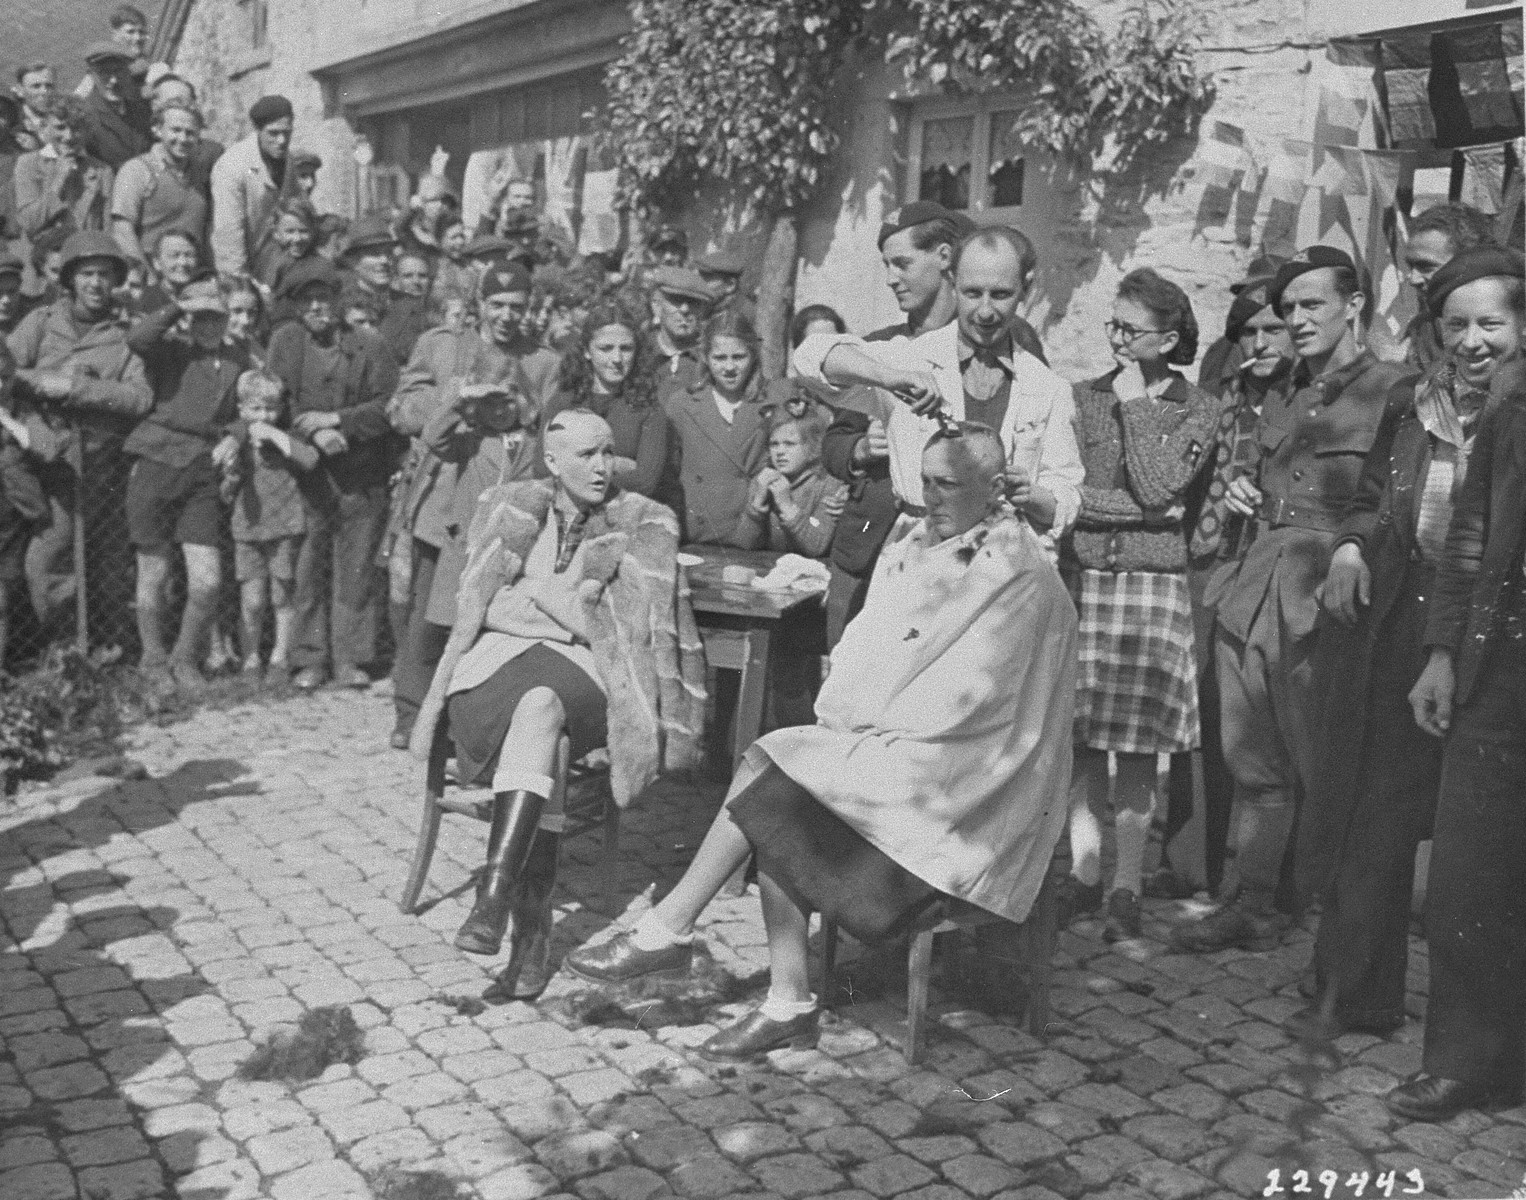 Belgian civilians and members of the resistance watch as a barber shaves the head of a woman who collaborated with the Nazis.  The woman at left has also had a swastika painted on her head.